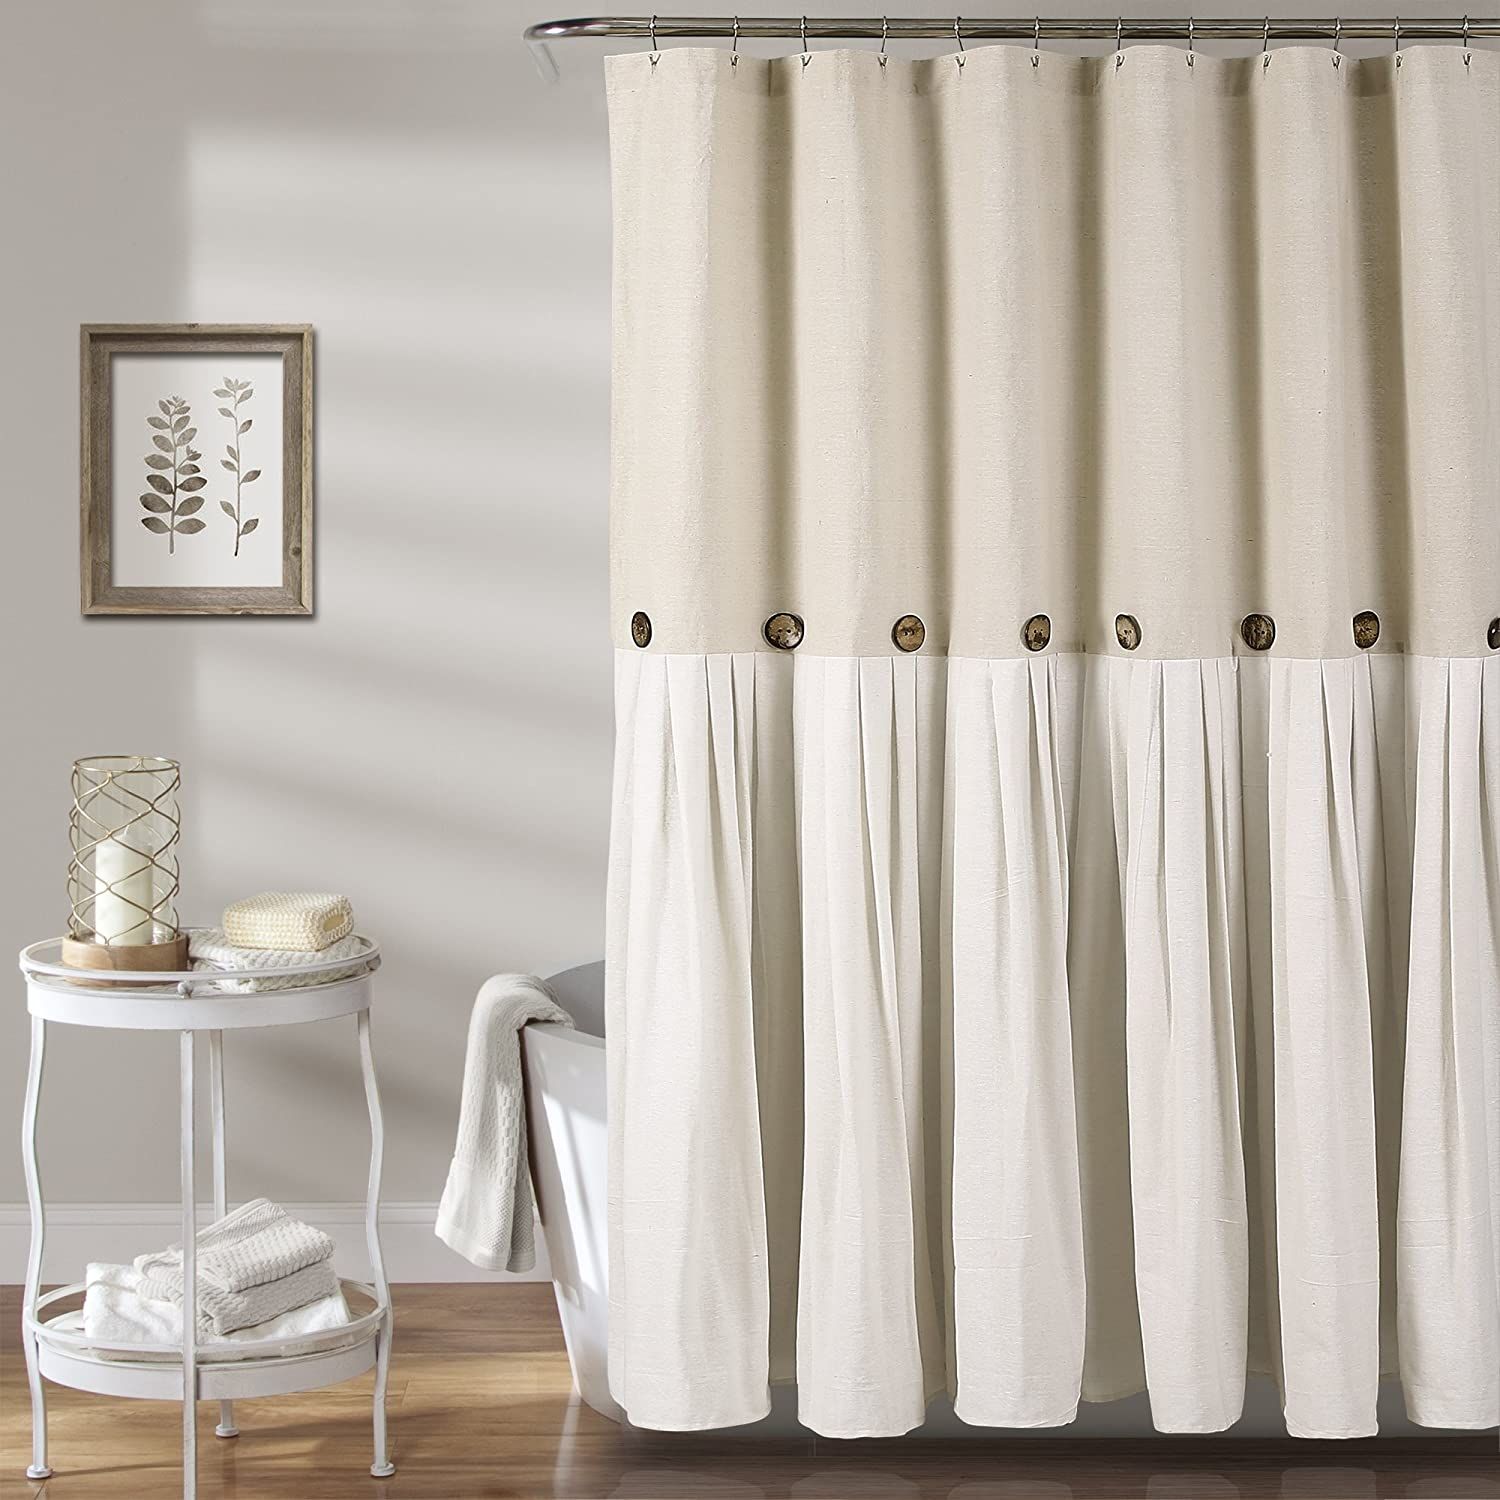 15 Incredible Bathroom Shower Curtain Sets for 2023